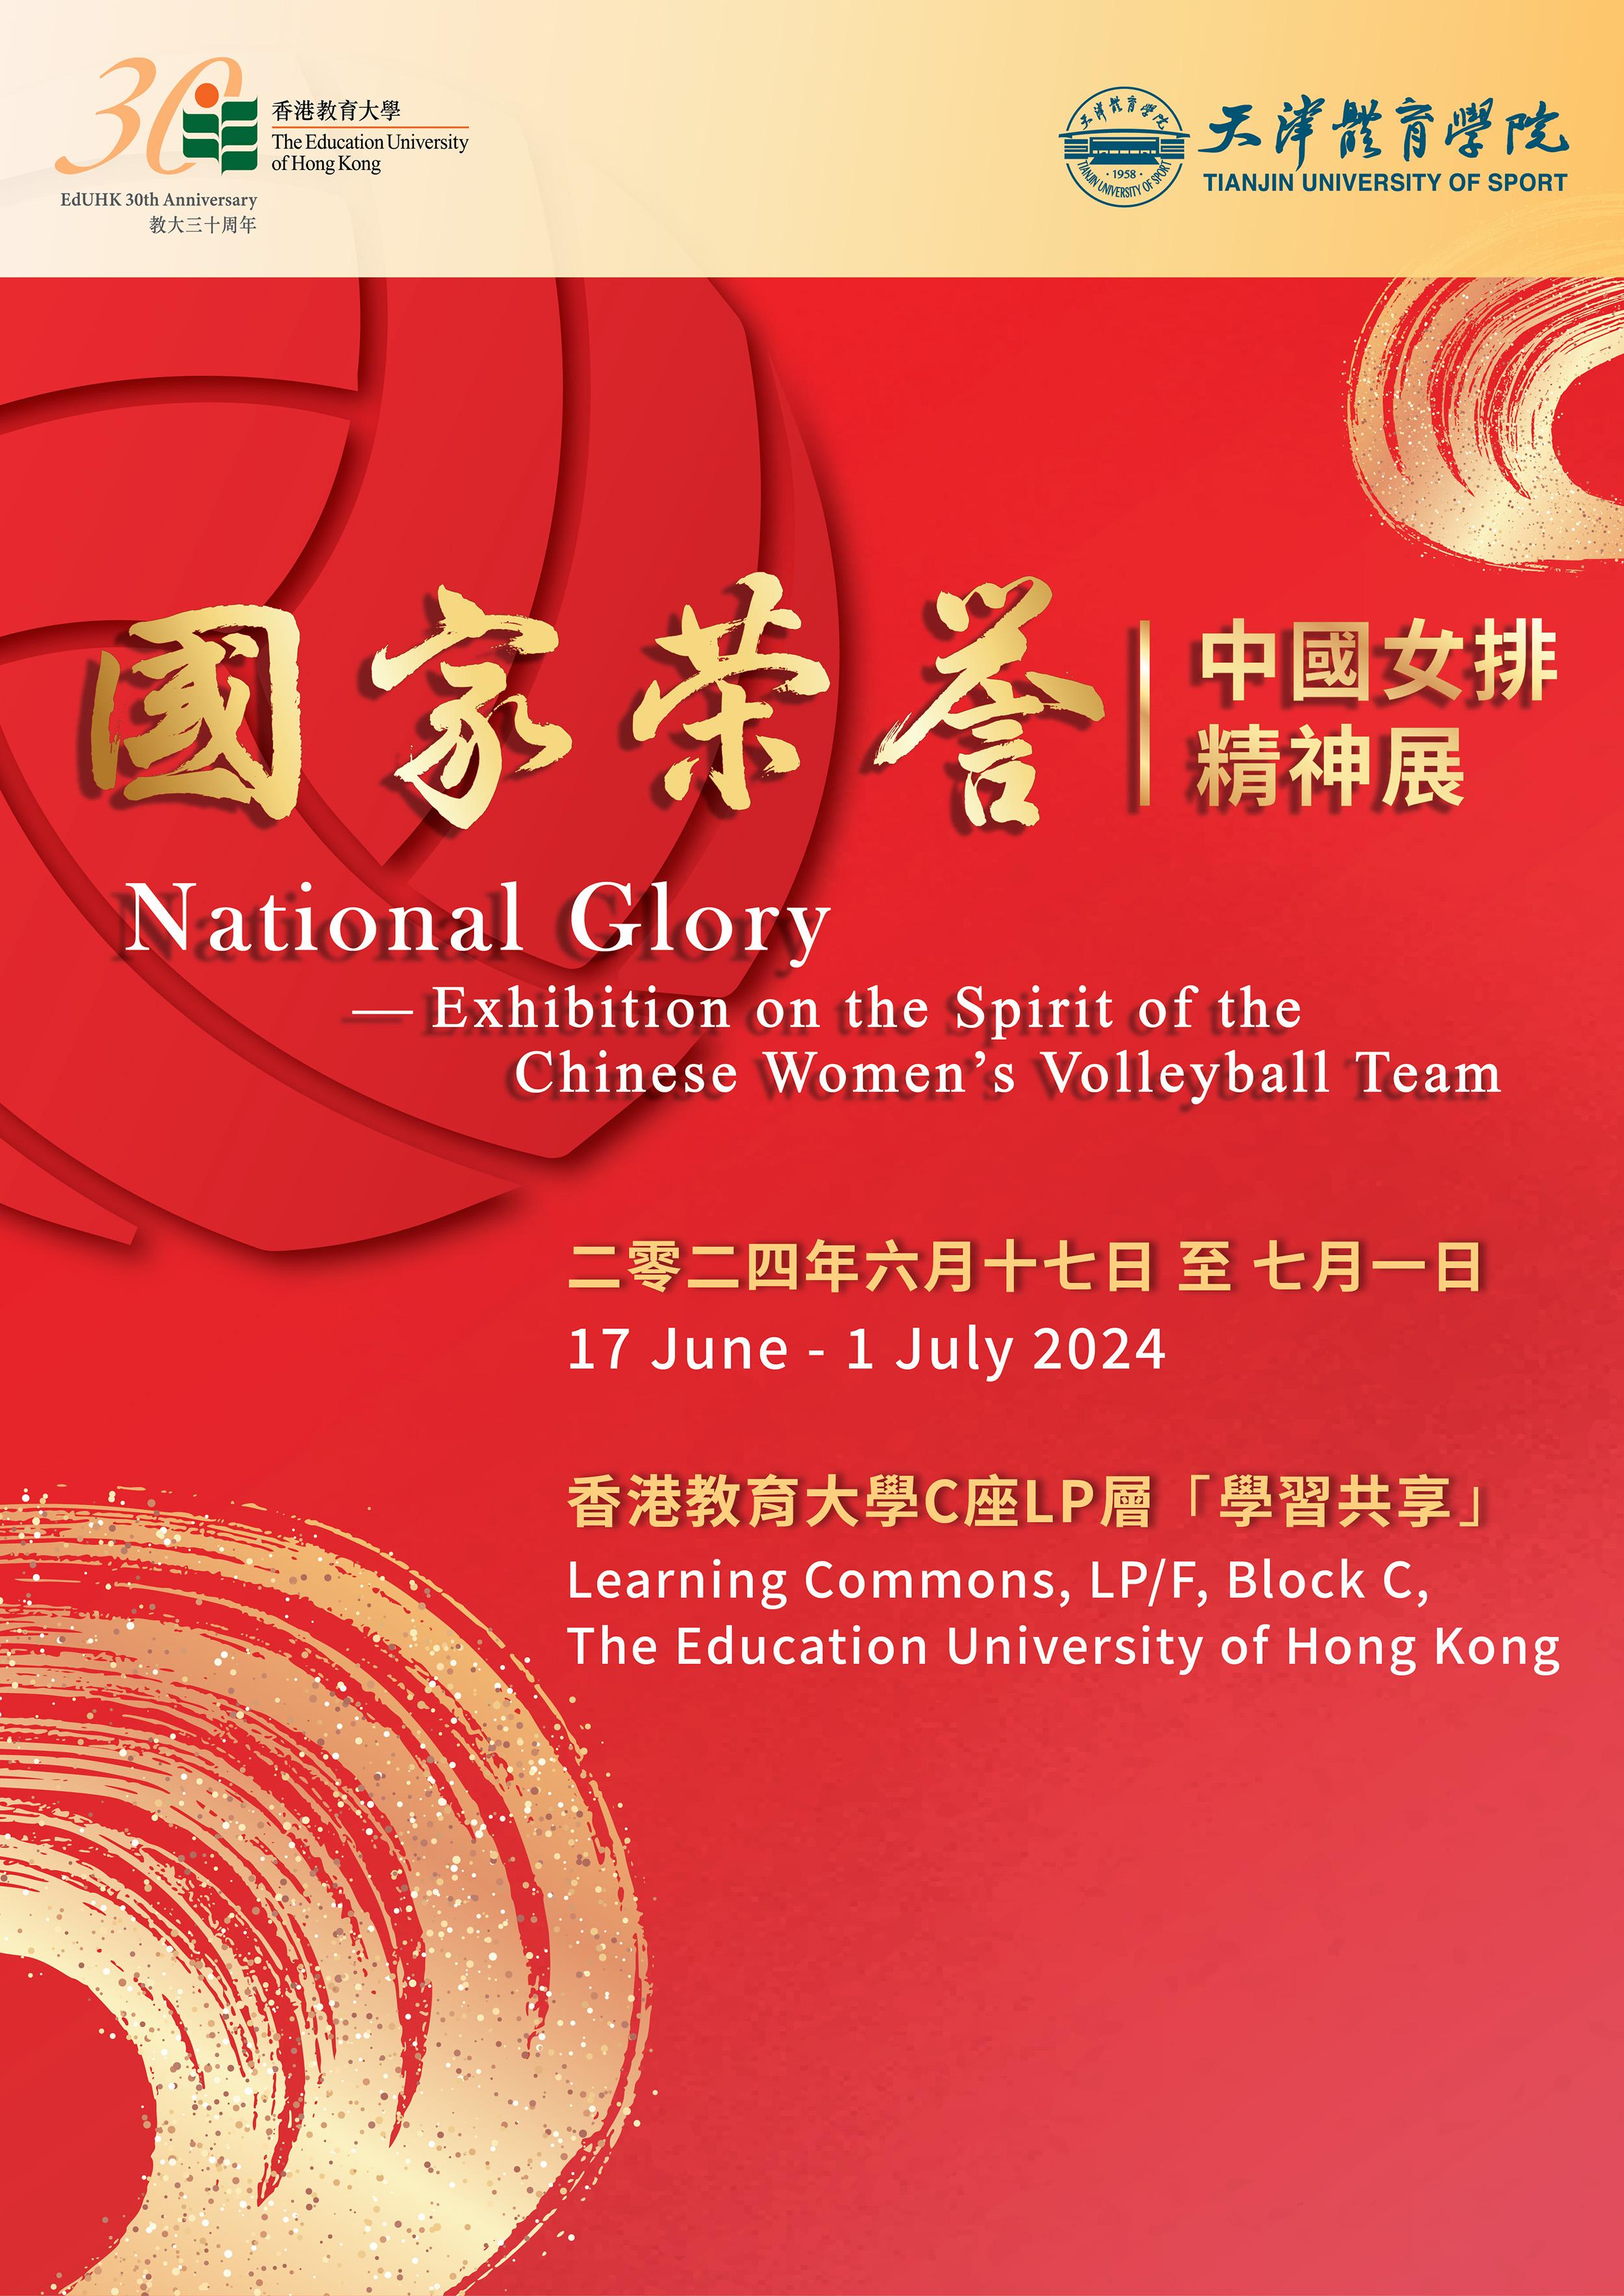 National Glory - Exhibition on the Spirit of the Chinese Women's Volleyball Team